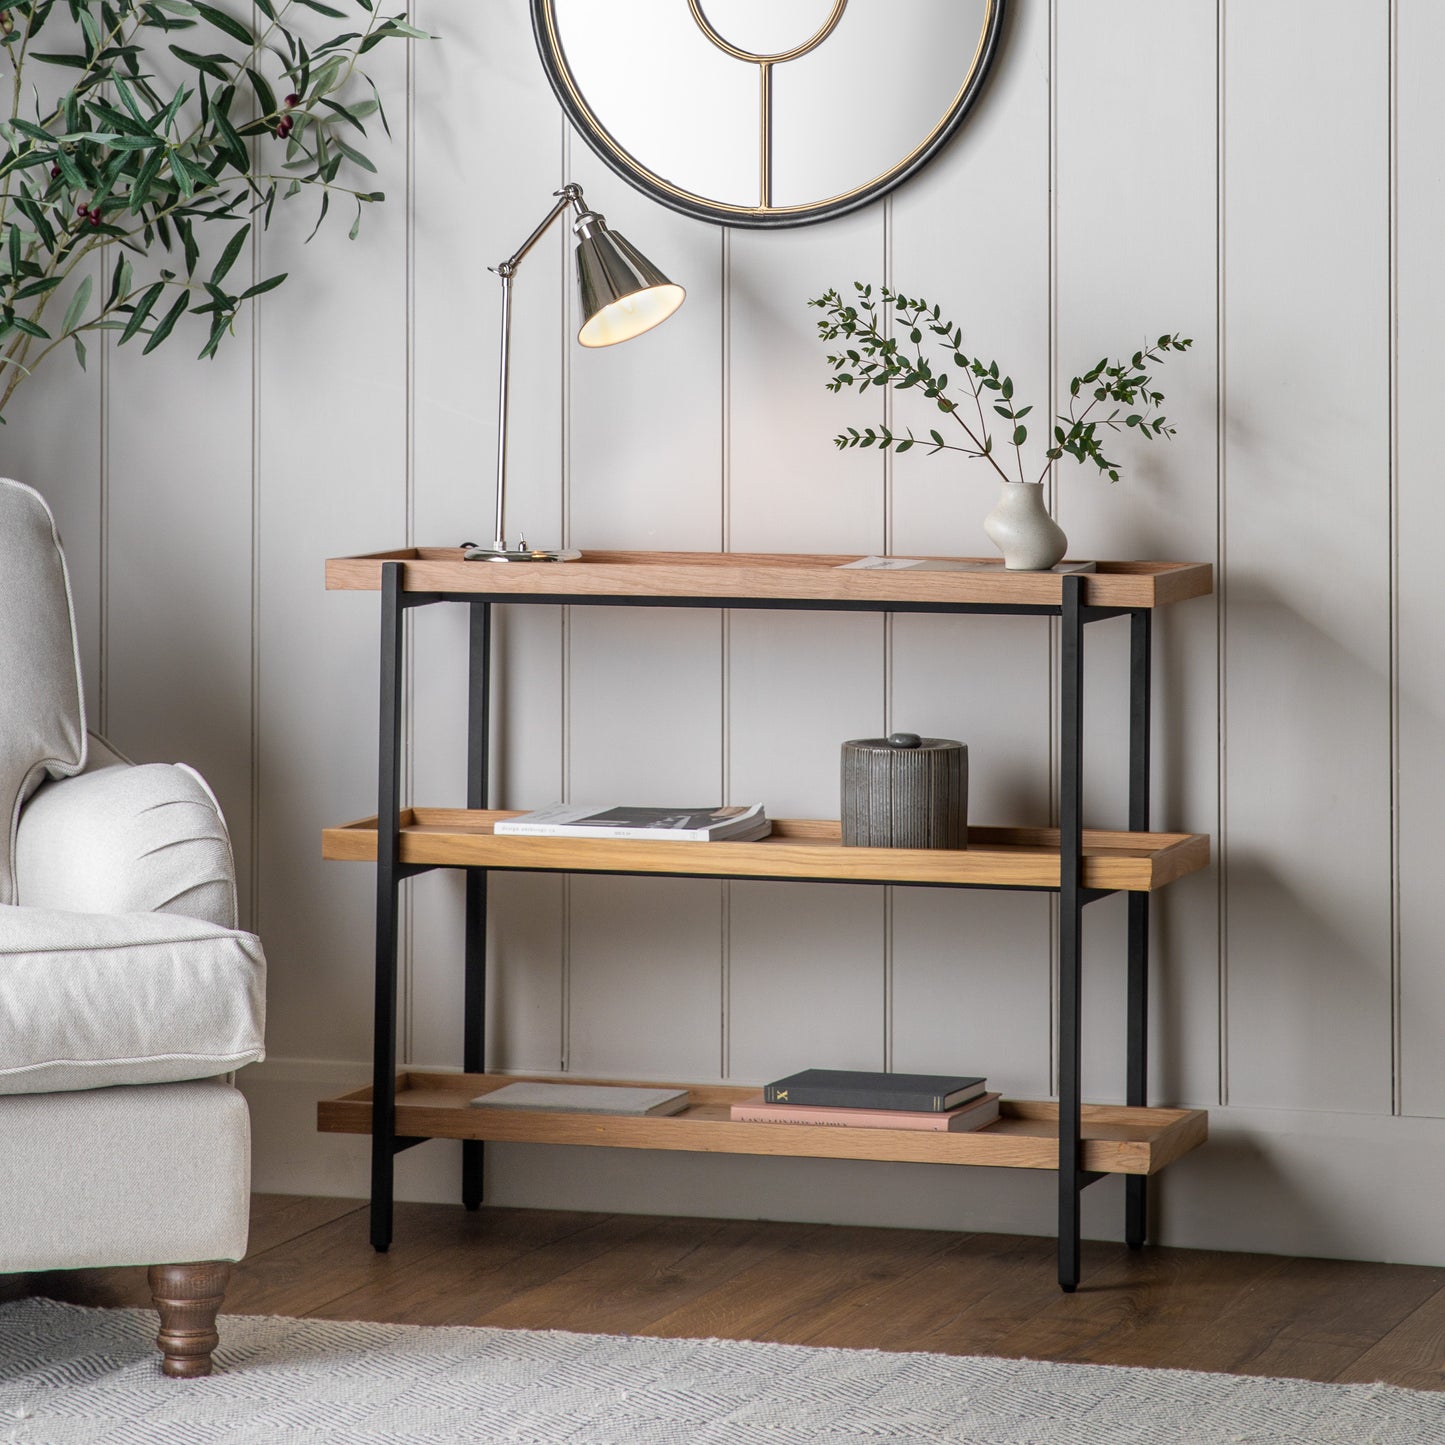 A Torrington Open Display Unit Small 1000x300x790mm from Kikiathome.co.uk in a living room with interior decor.